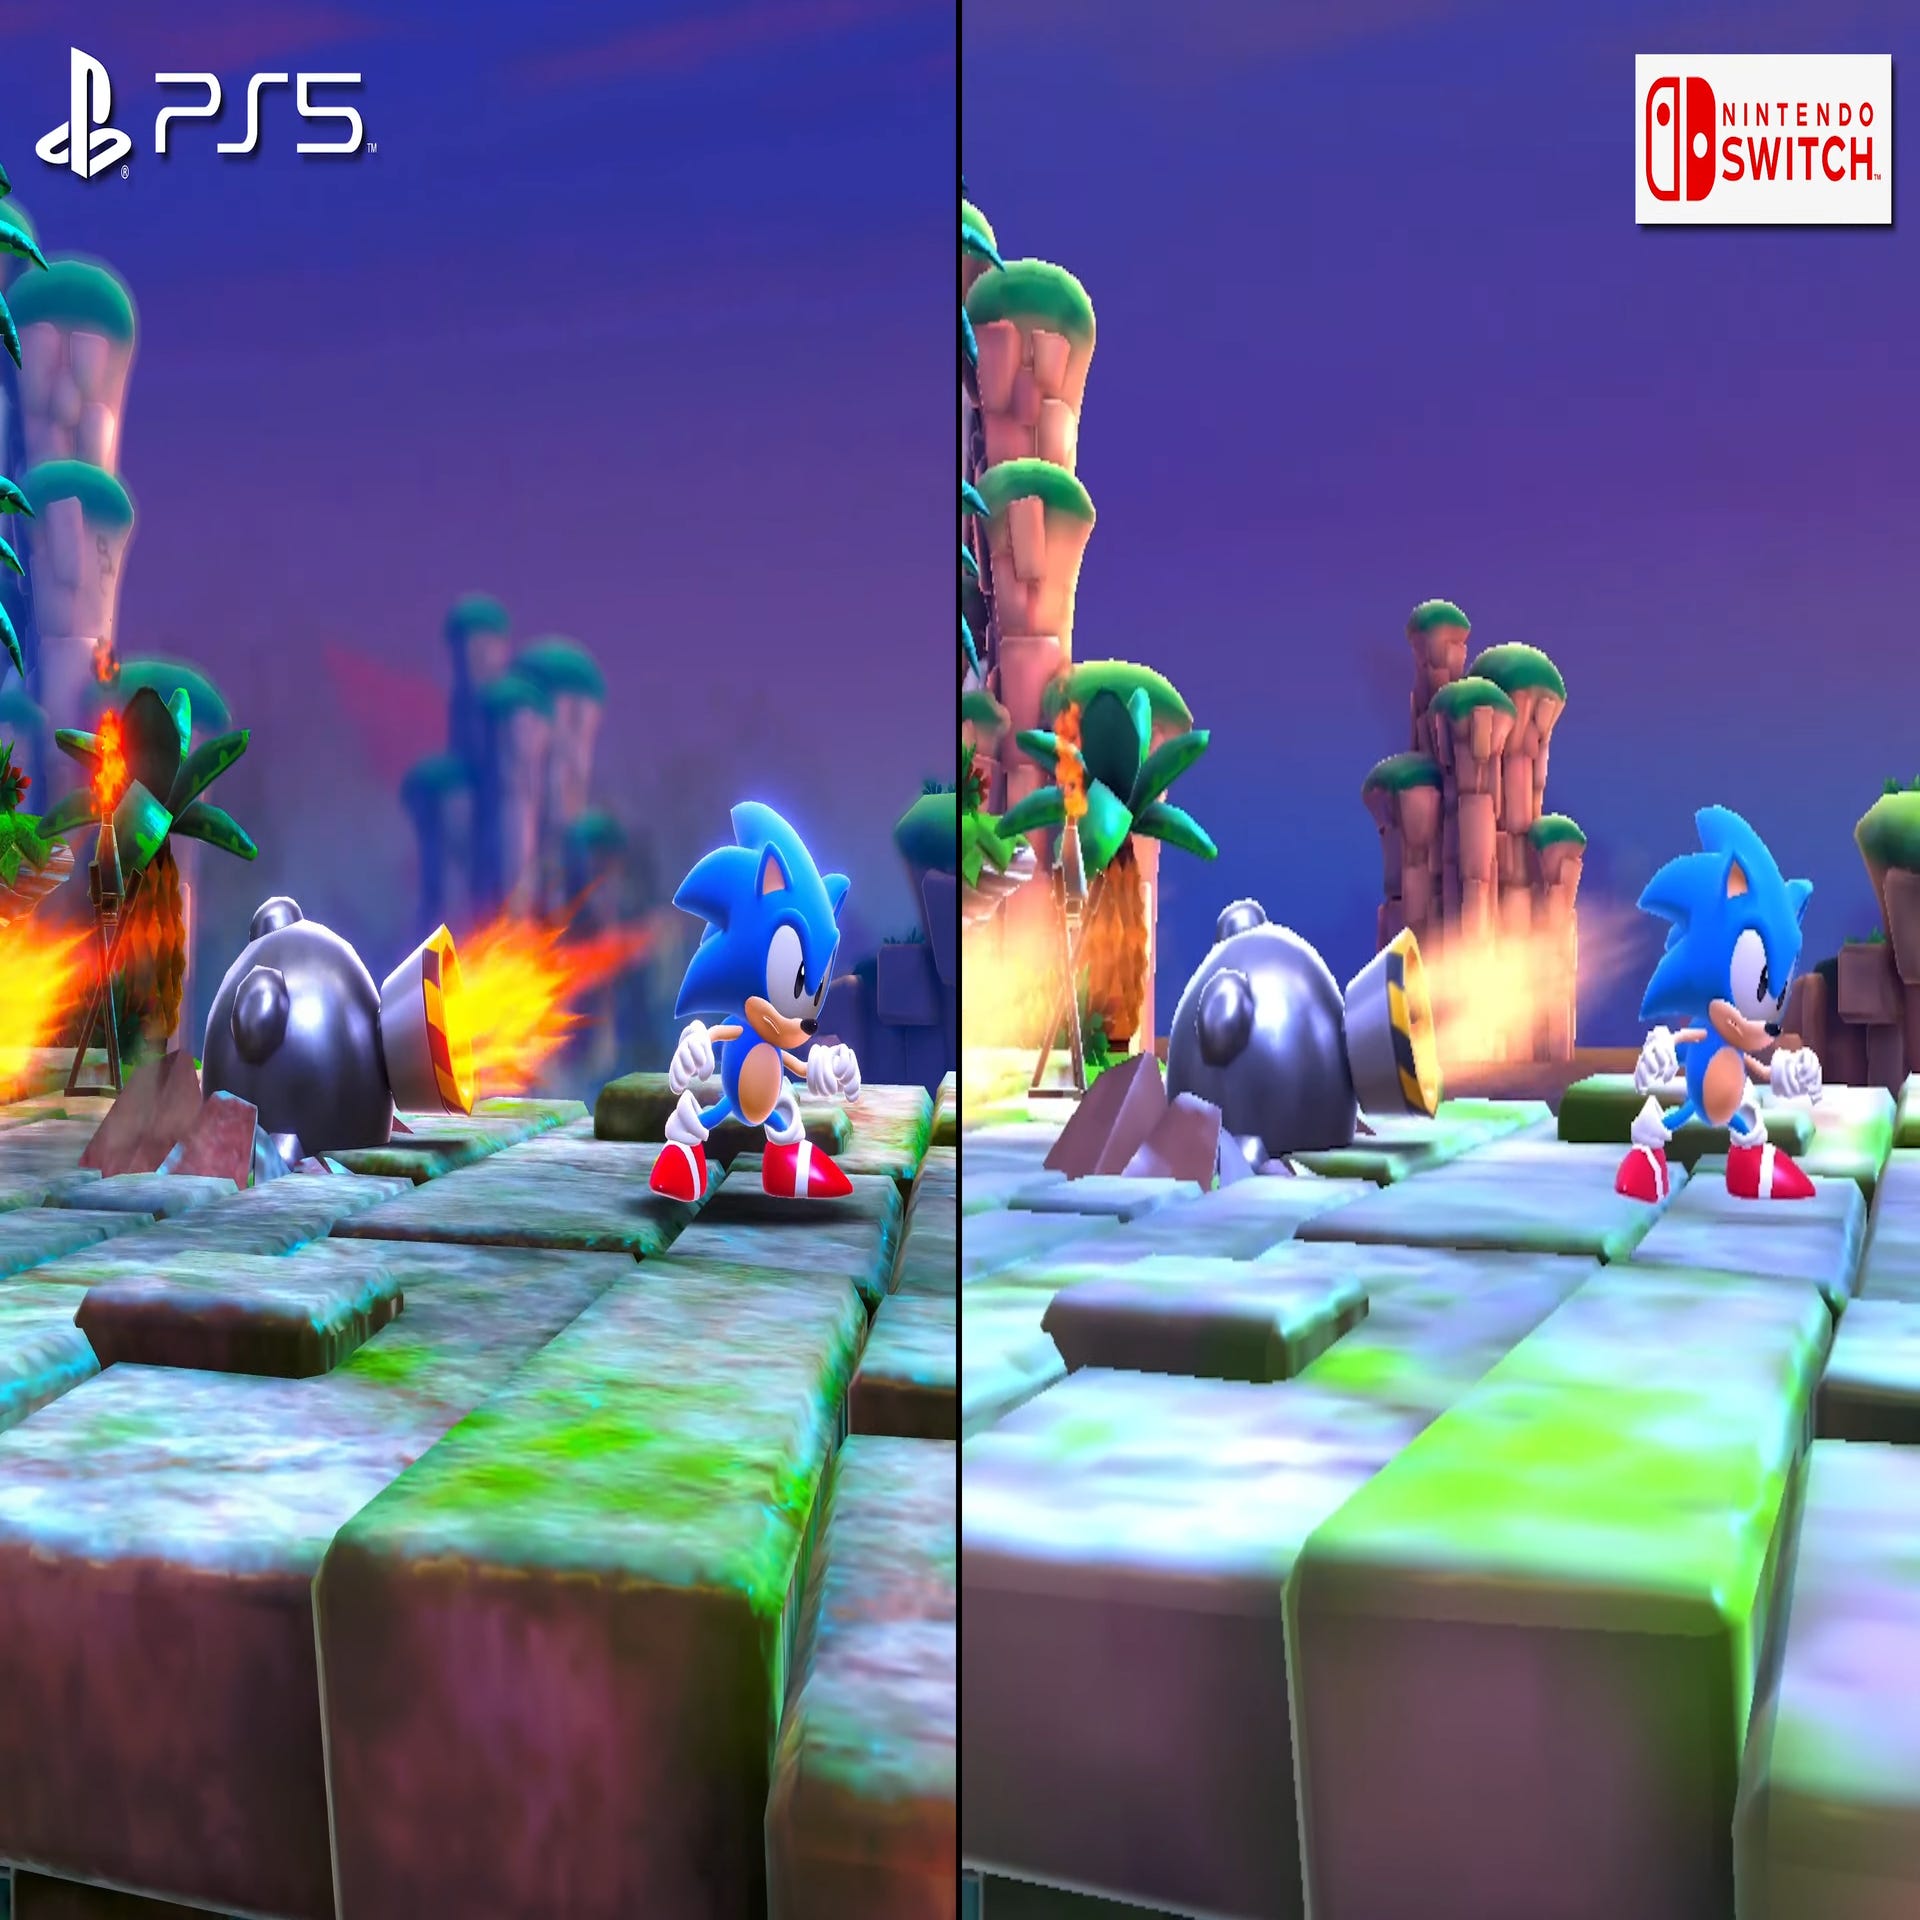 Sonic Superstars recaptures the magic of 16-bit Sonic - but it's not a  perfect return to form